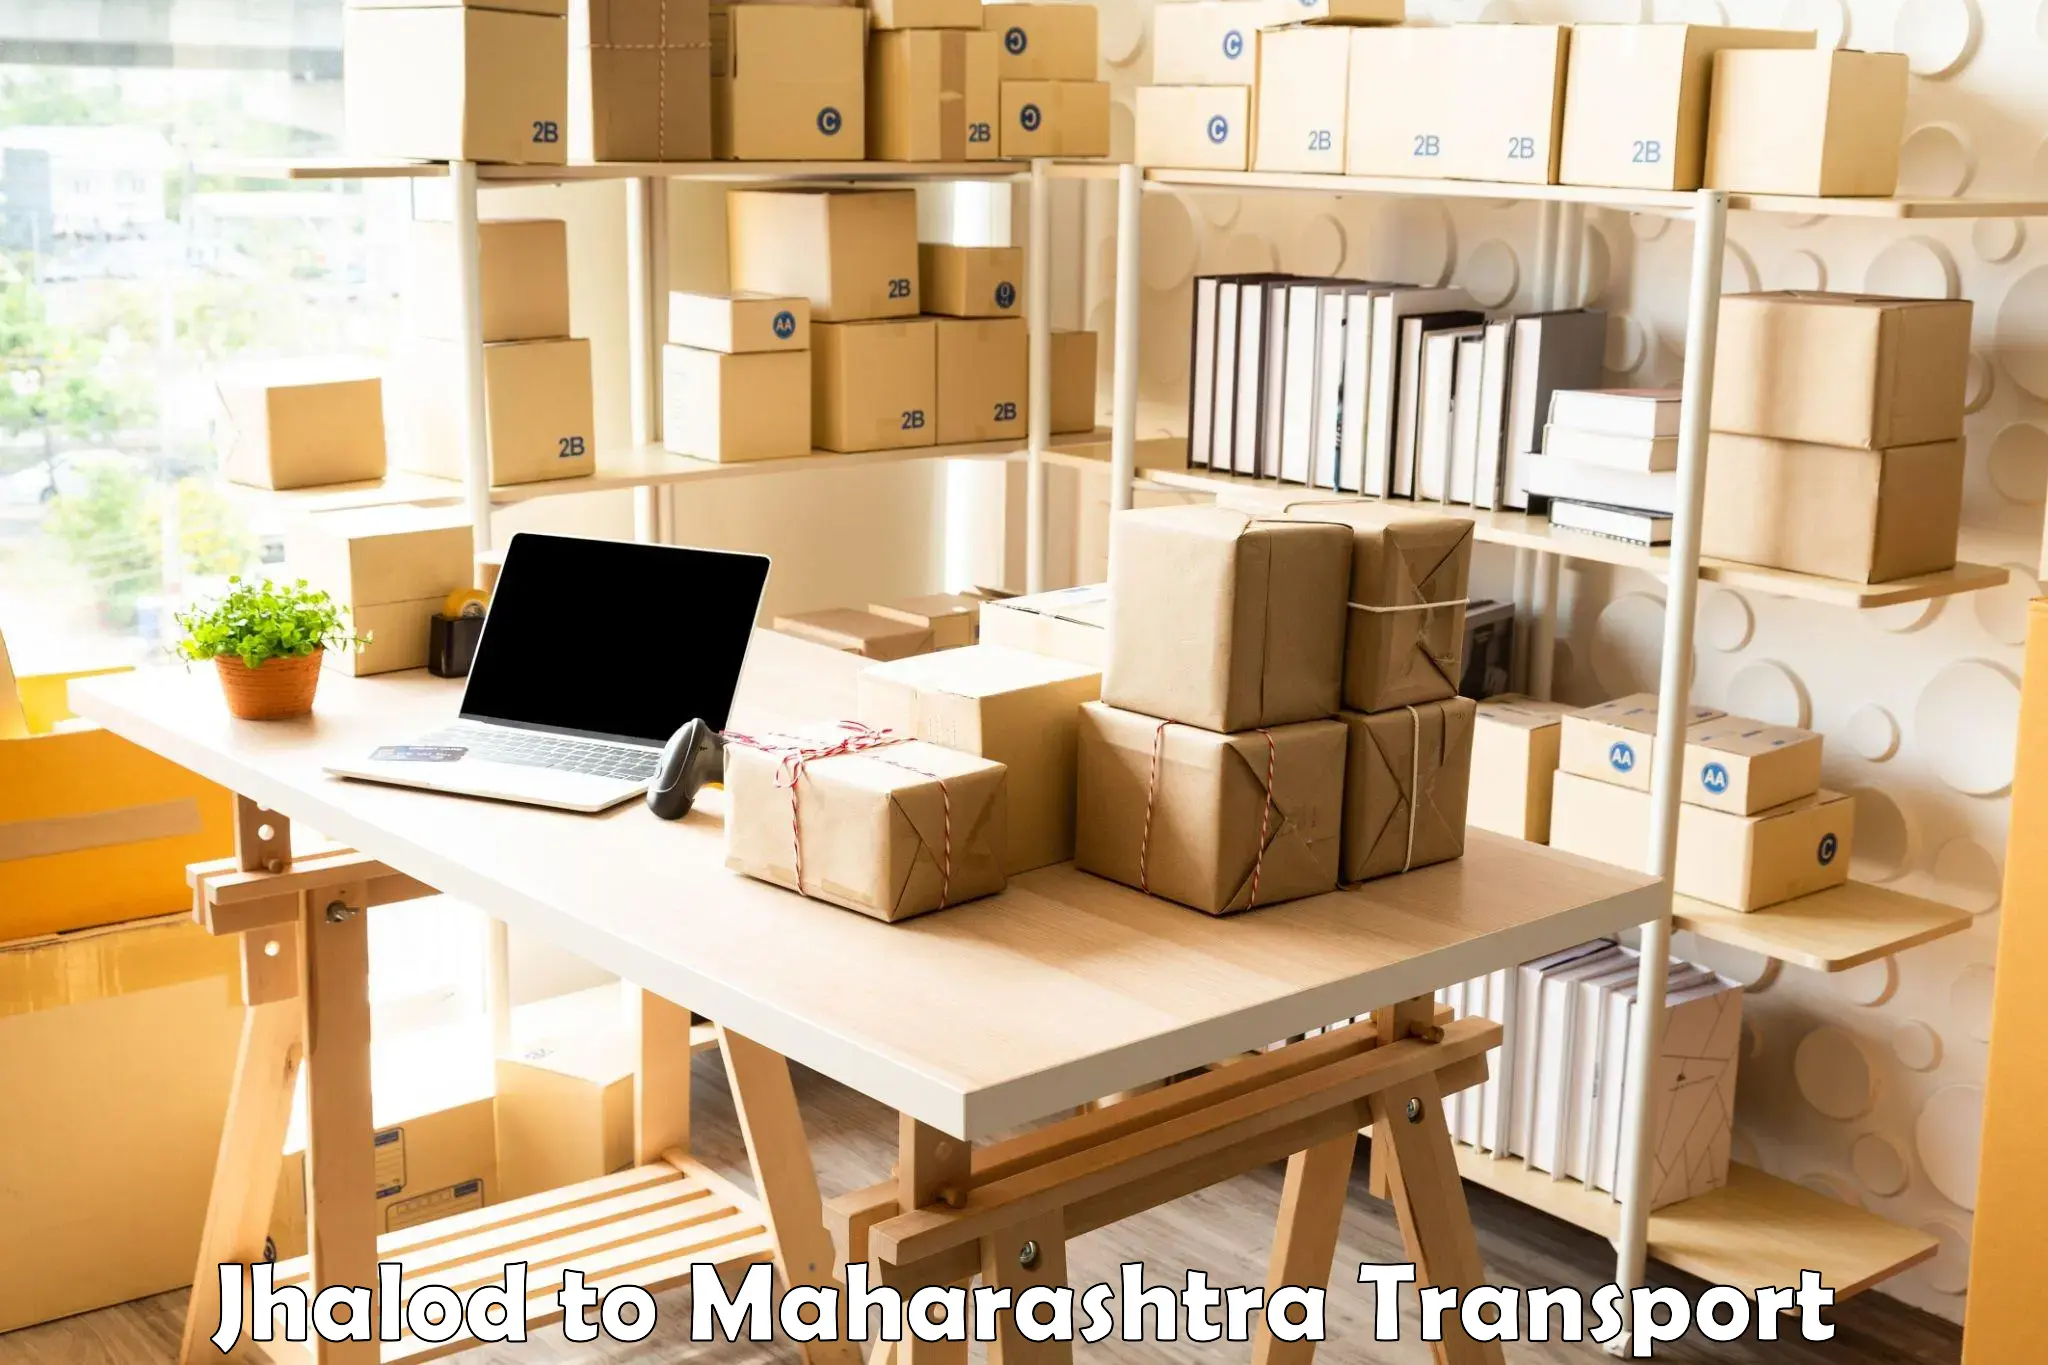 Nationwide transport services Jhalod to Thane